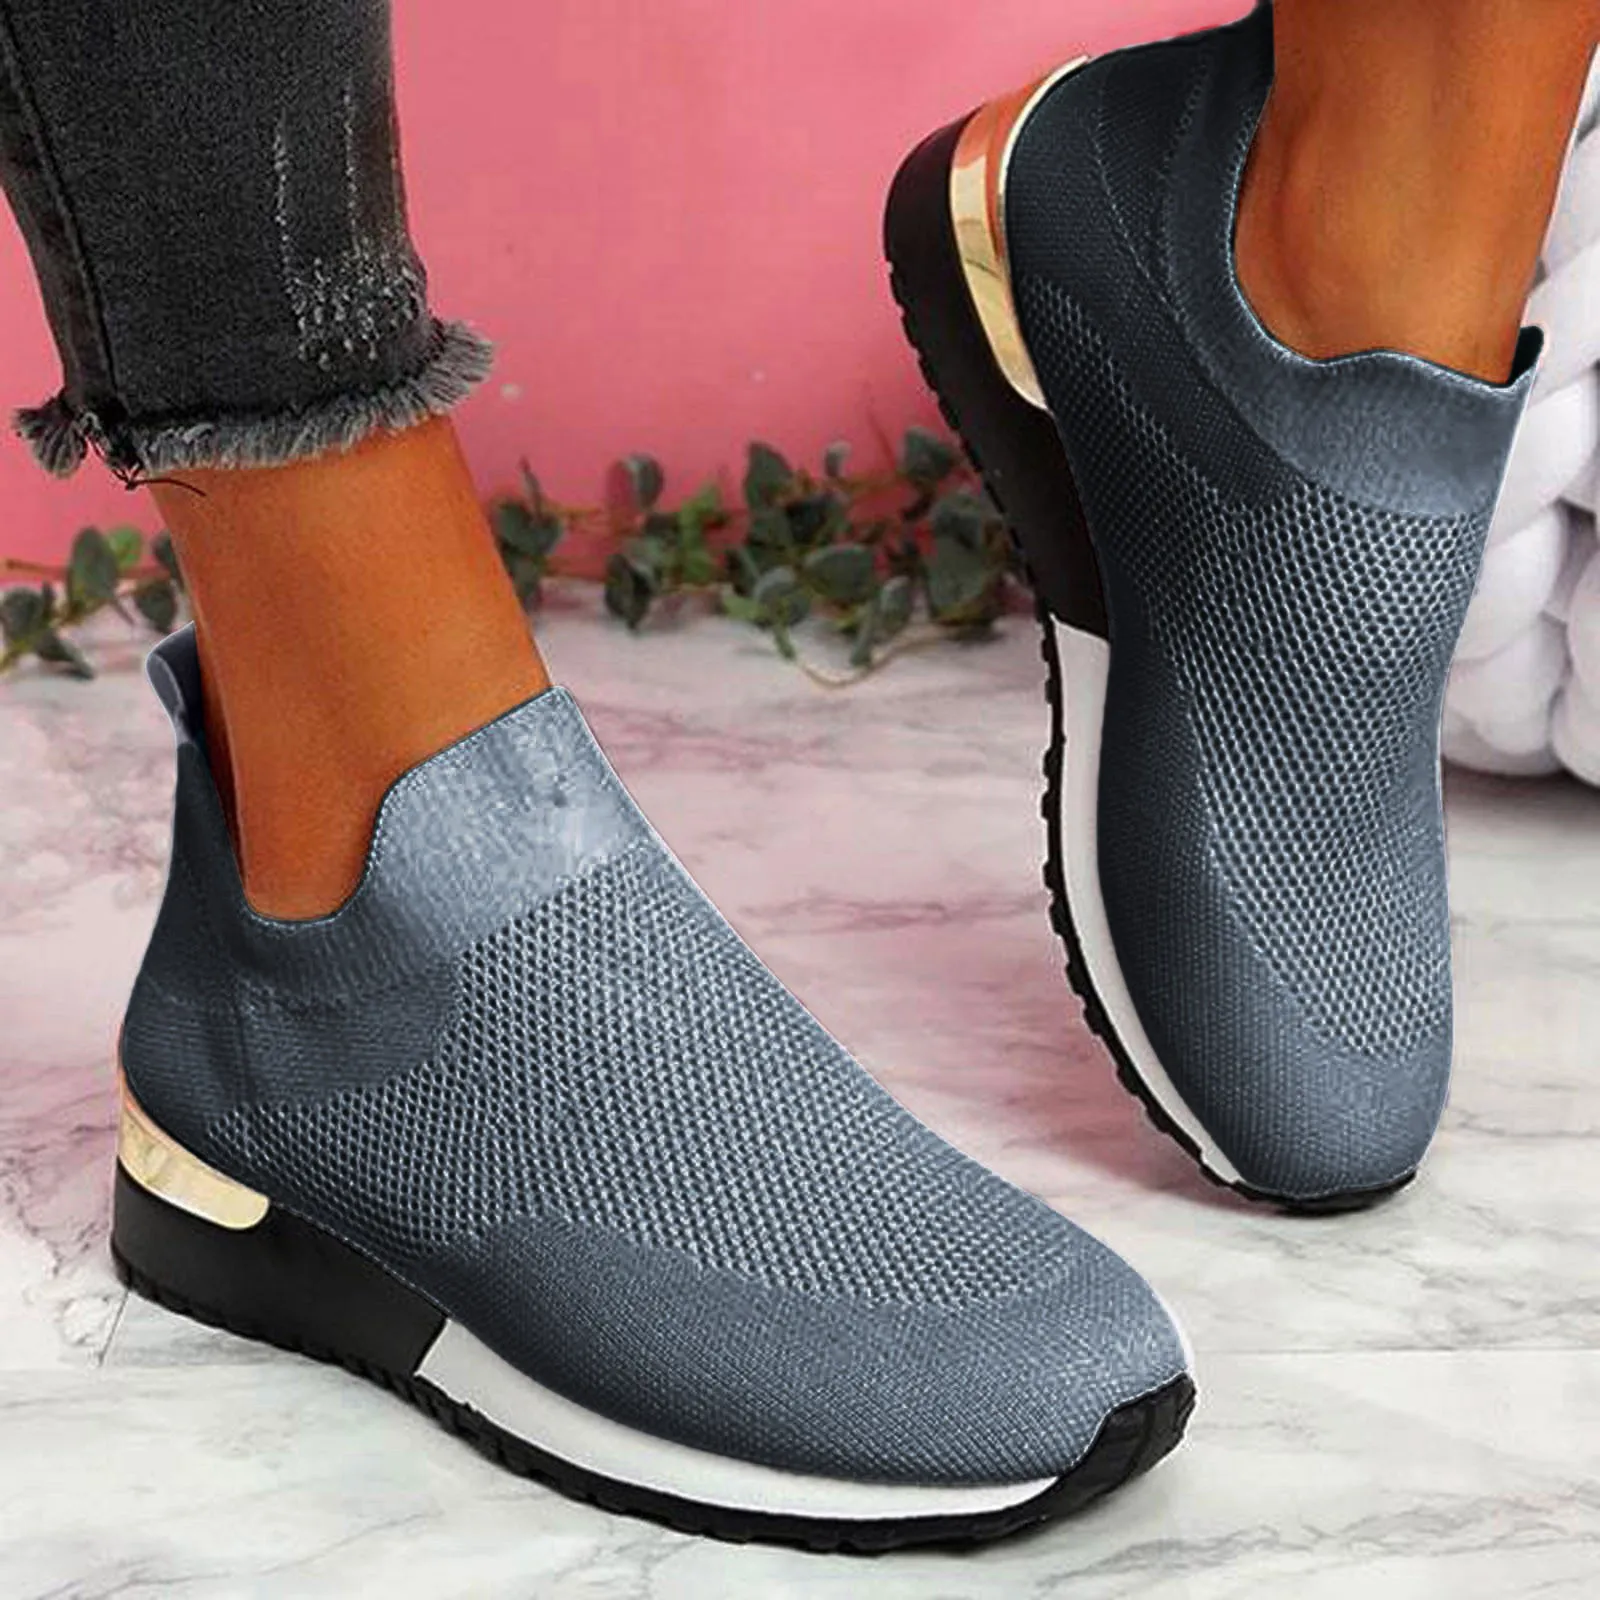 R mesh solid color sports shoes runing breathable shoes sneakers sports shoes for women thumb200